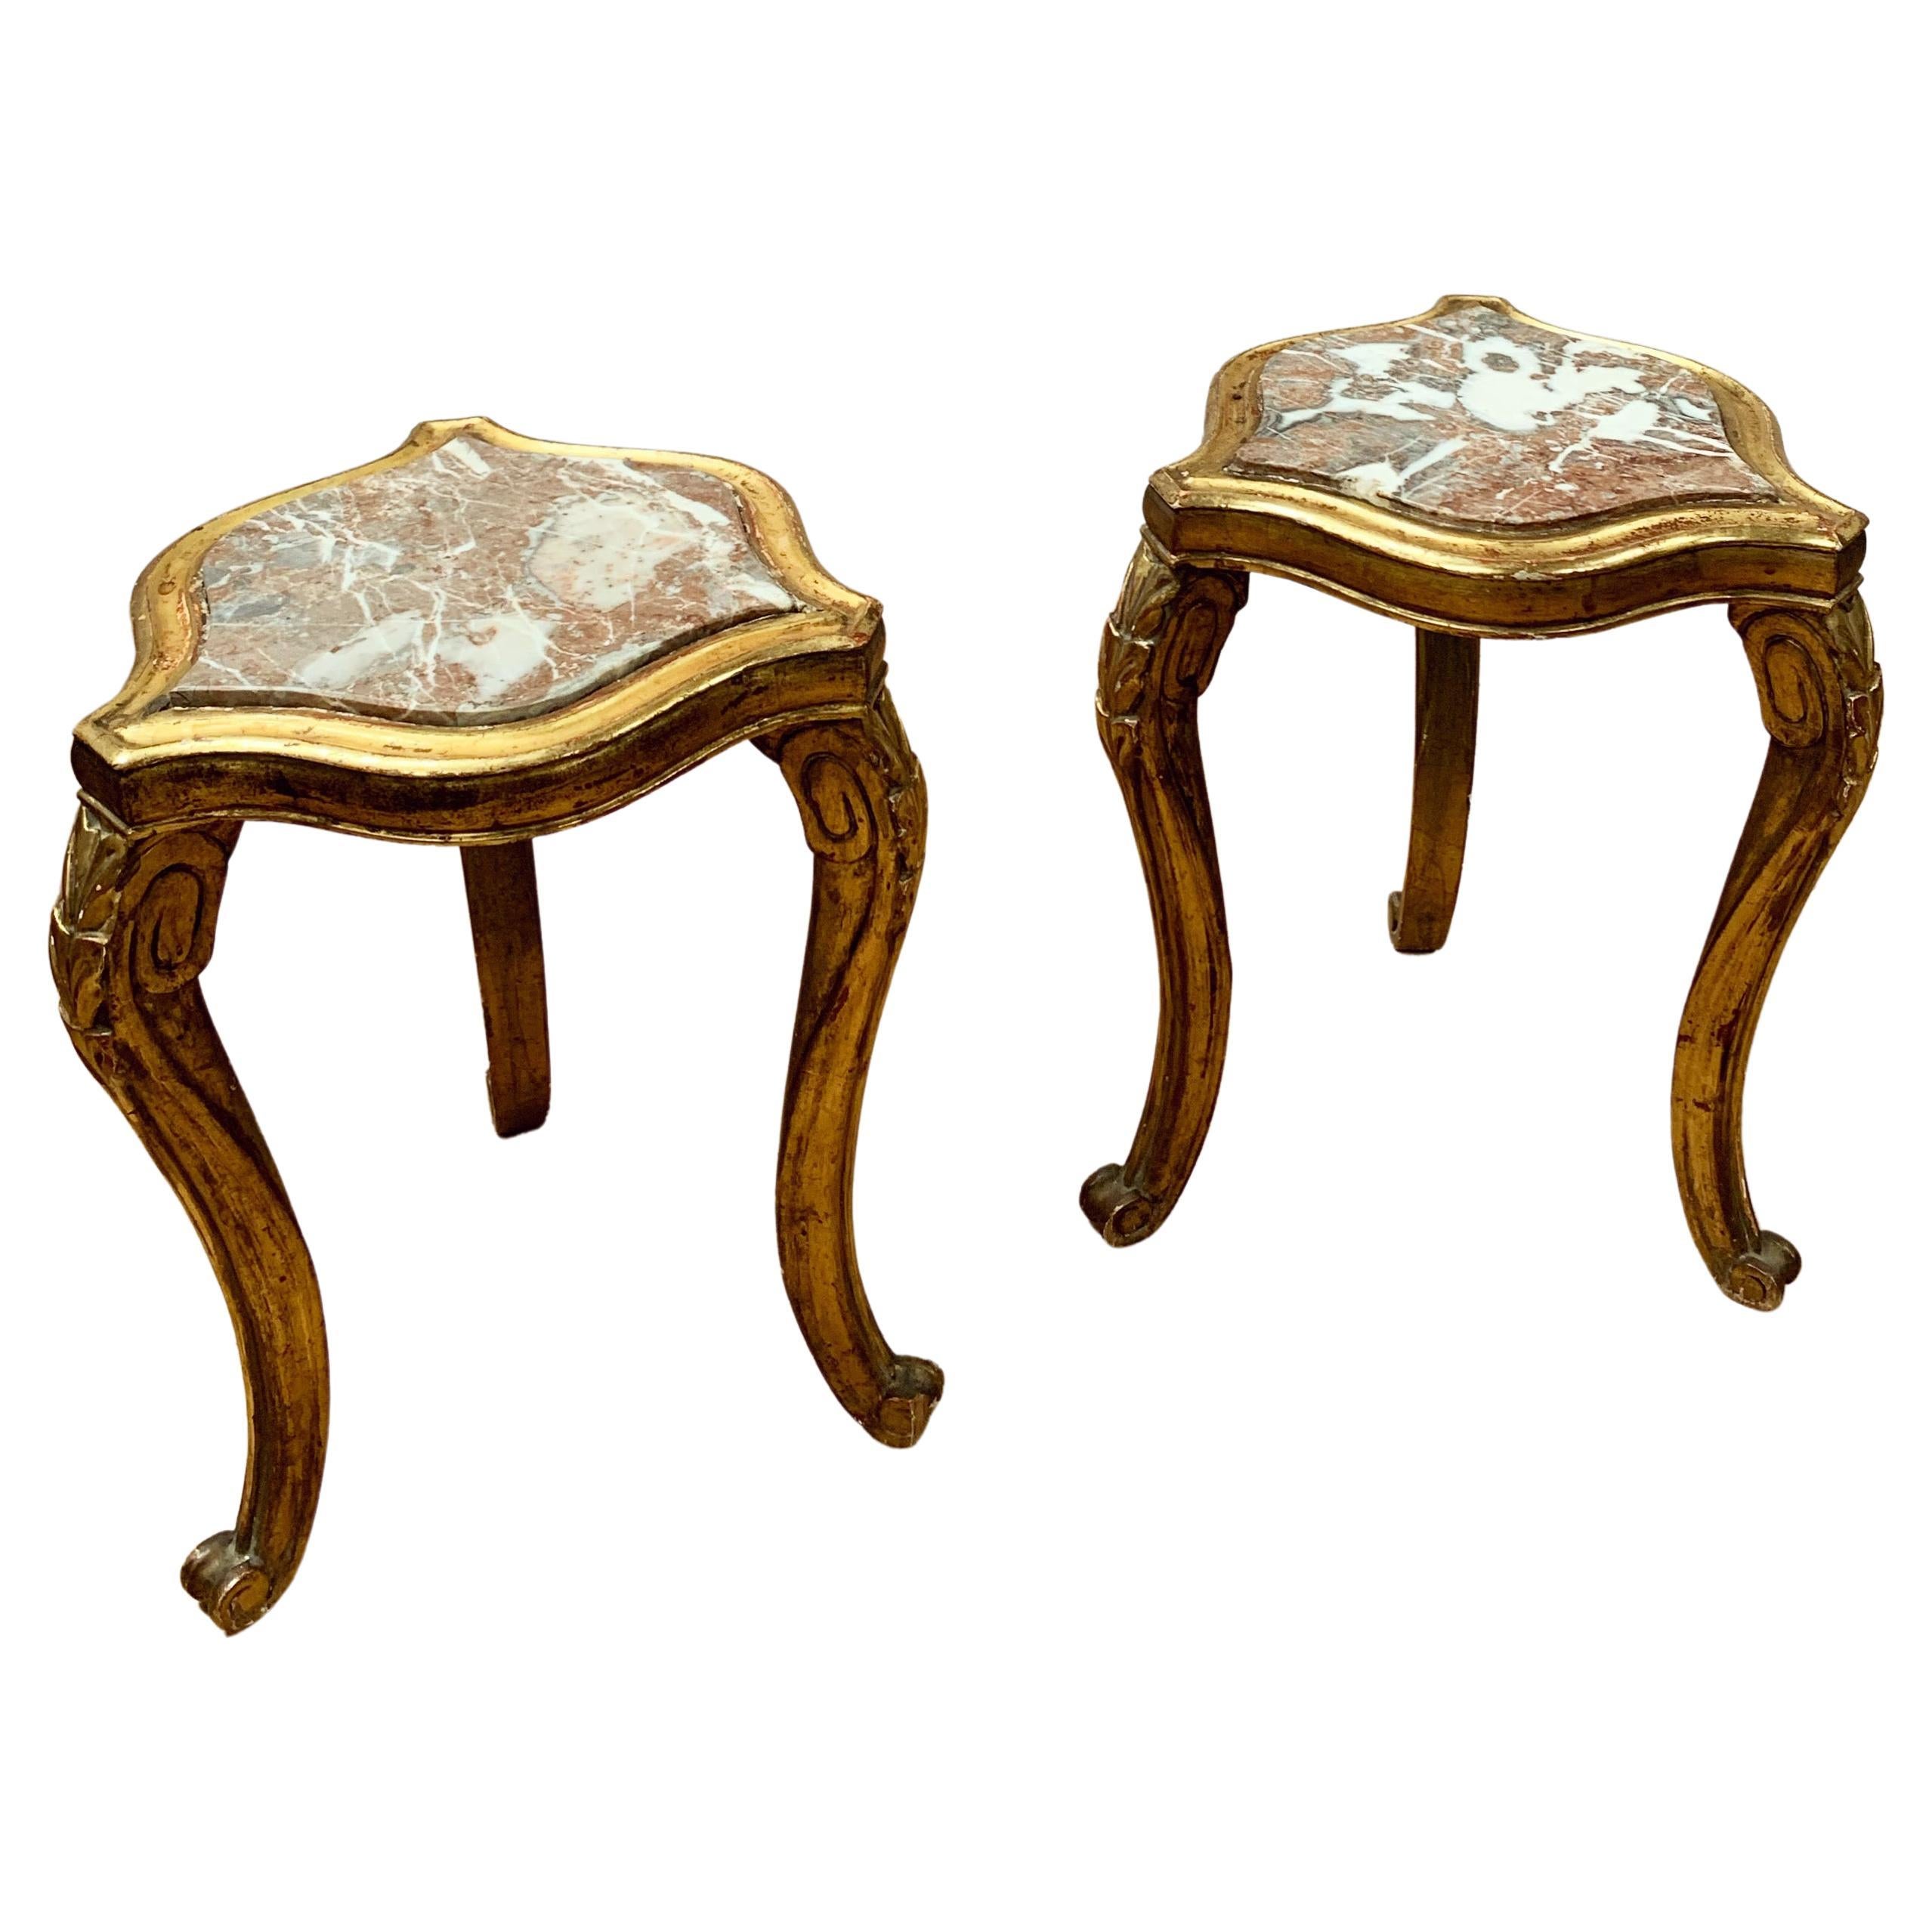 Pair of Giltwood and Marble Vase Stands